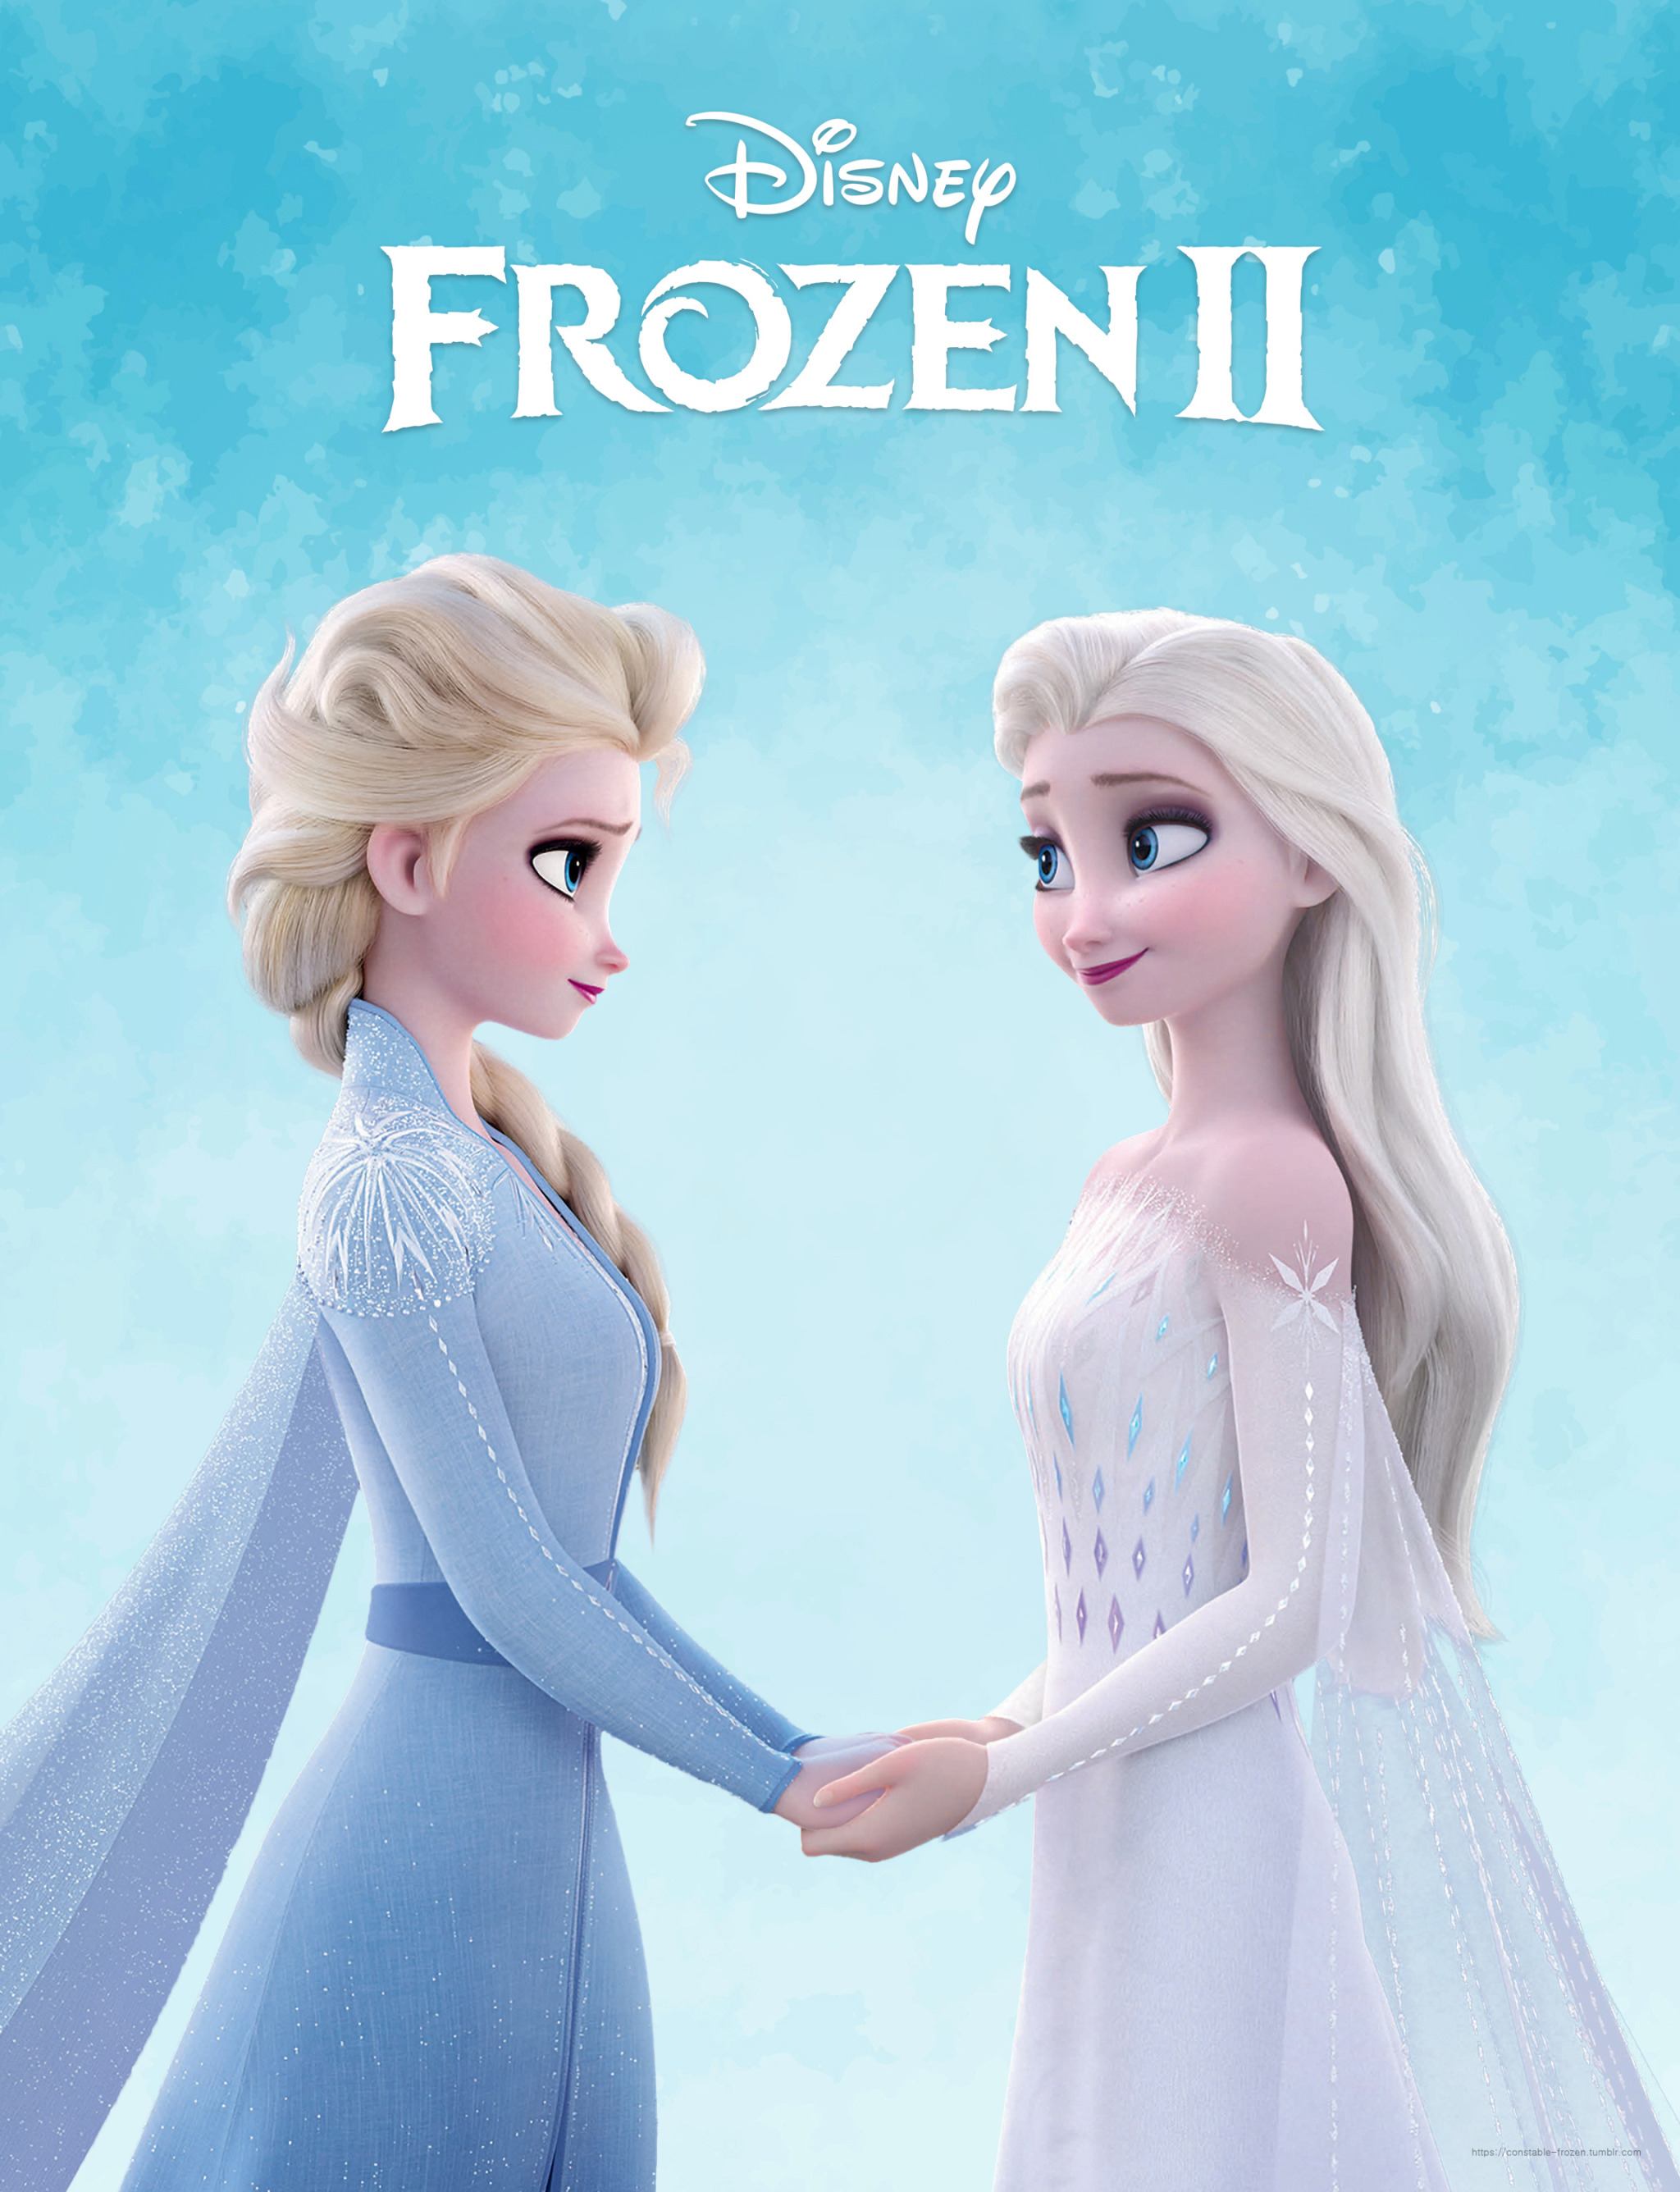 New Frozen 2 Pictures Including Pictures Of Elsa In White Dress